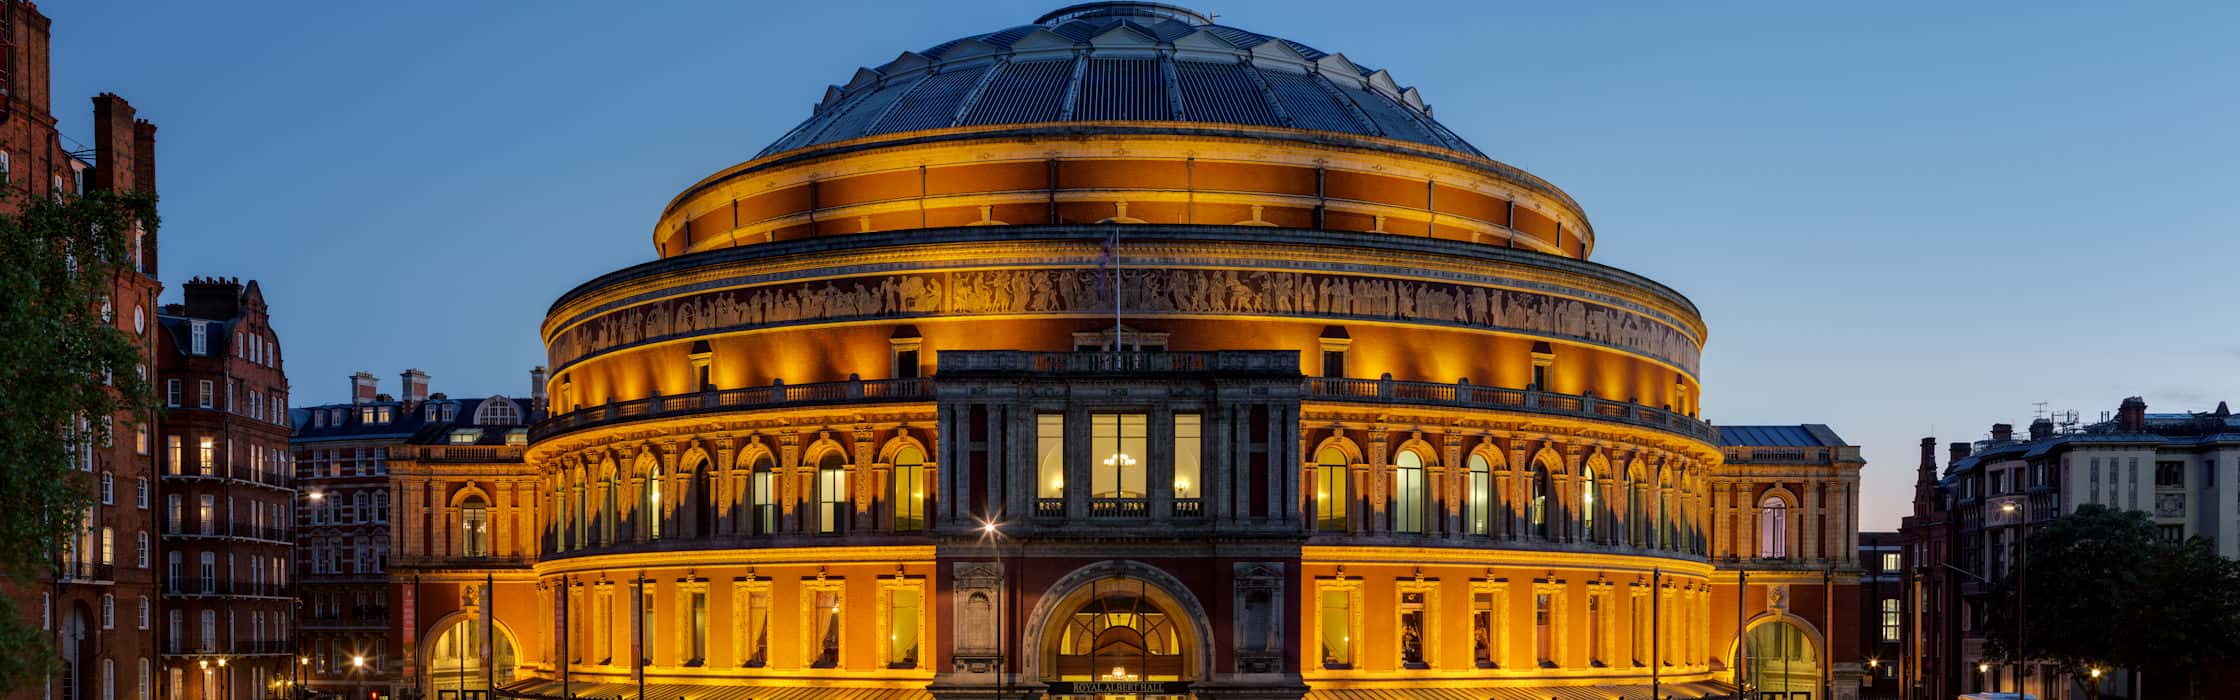 What's On at The Royal Albert Hall, London